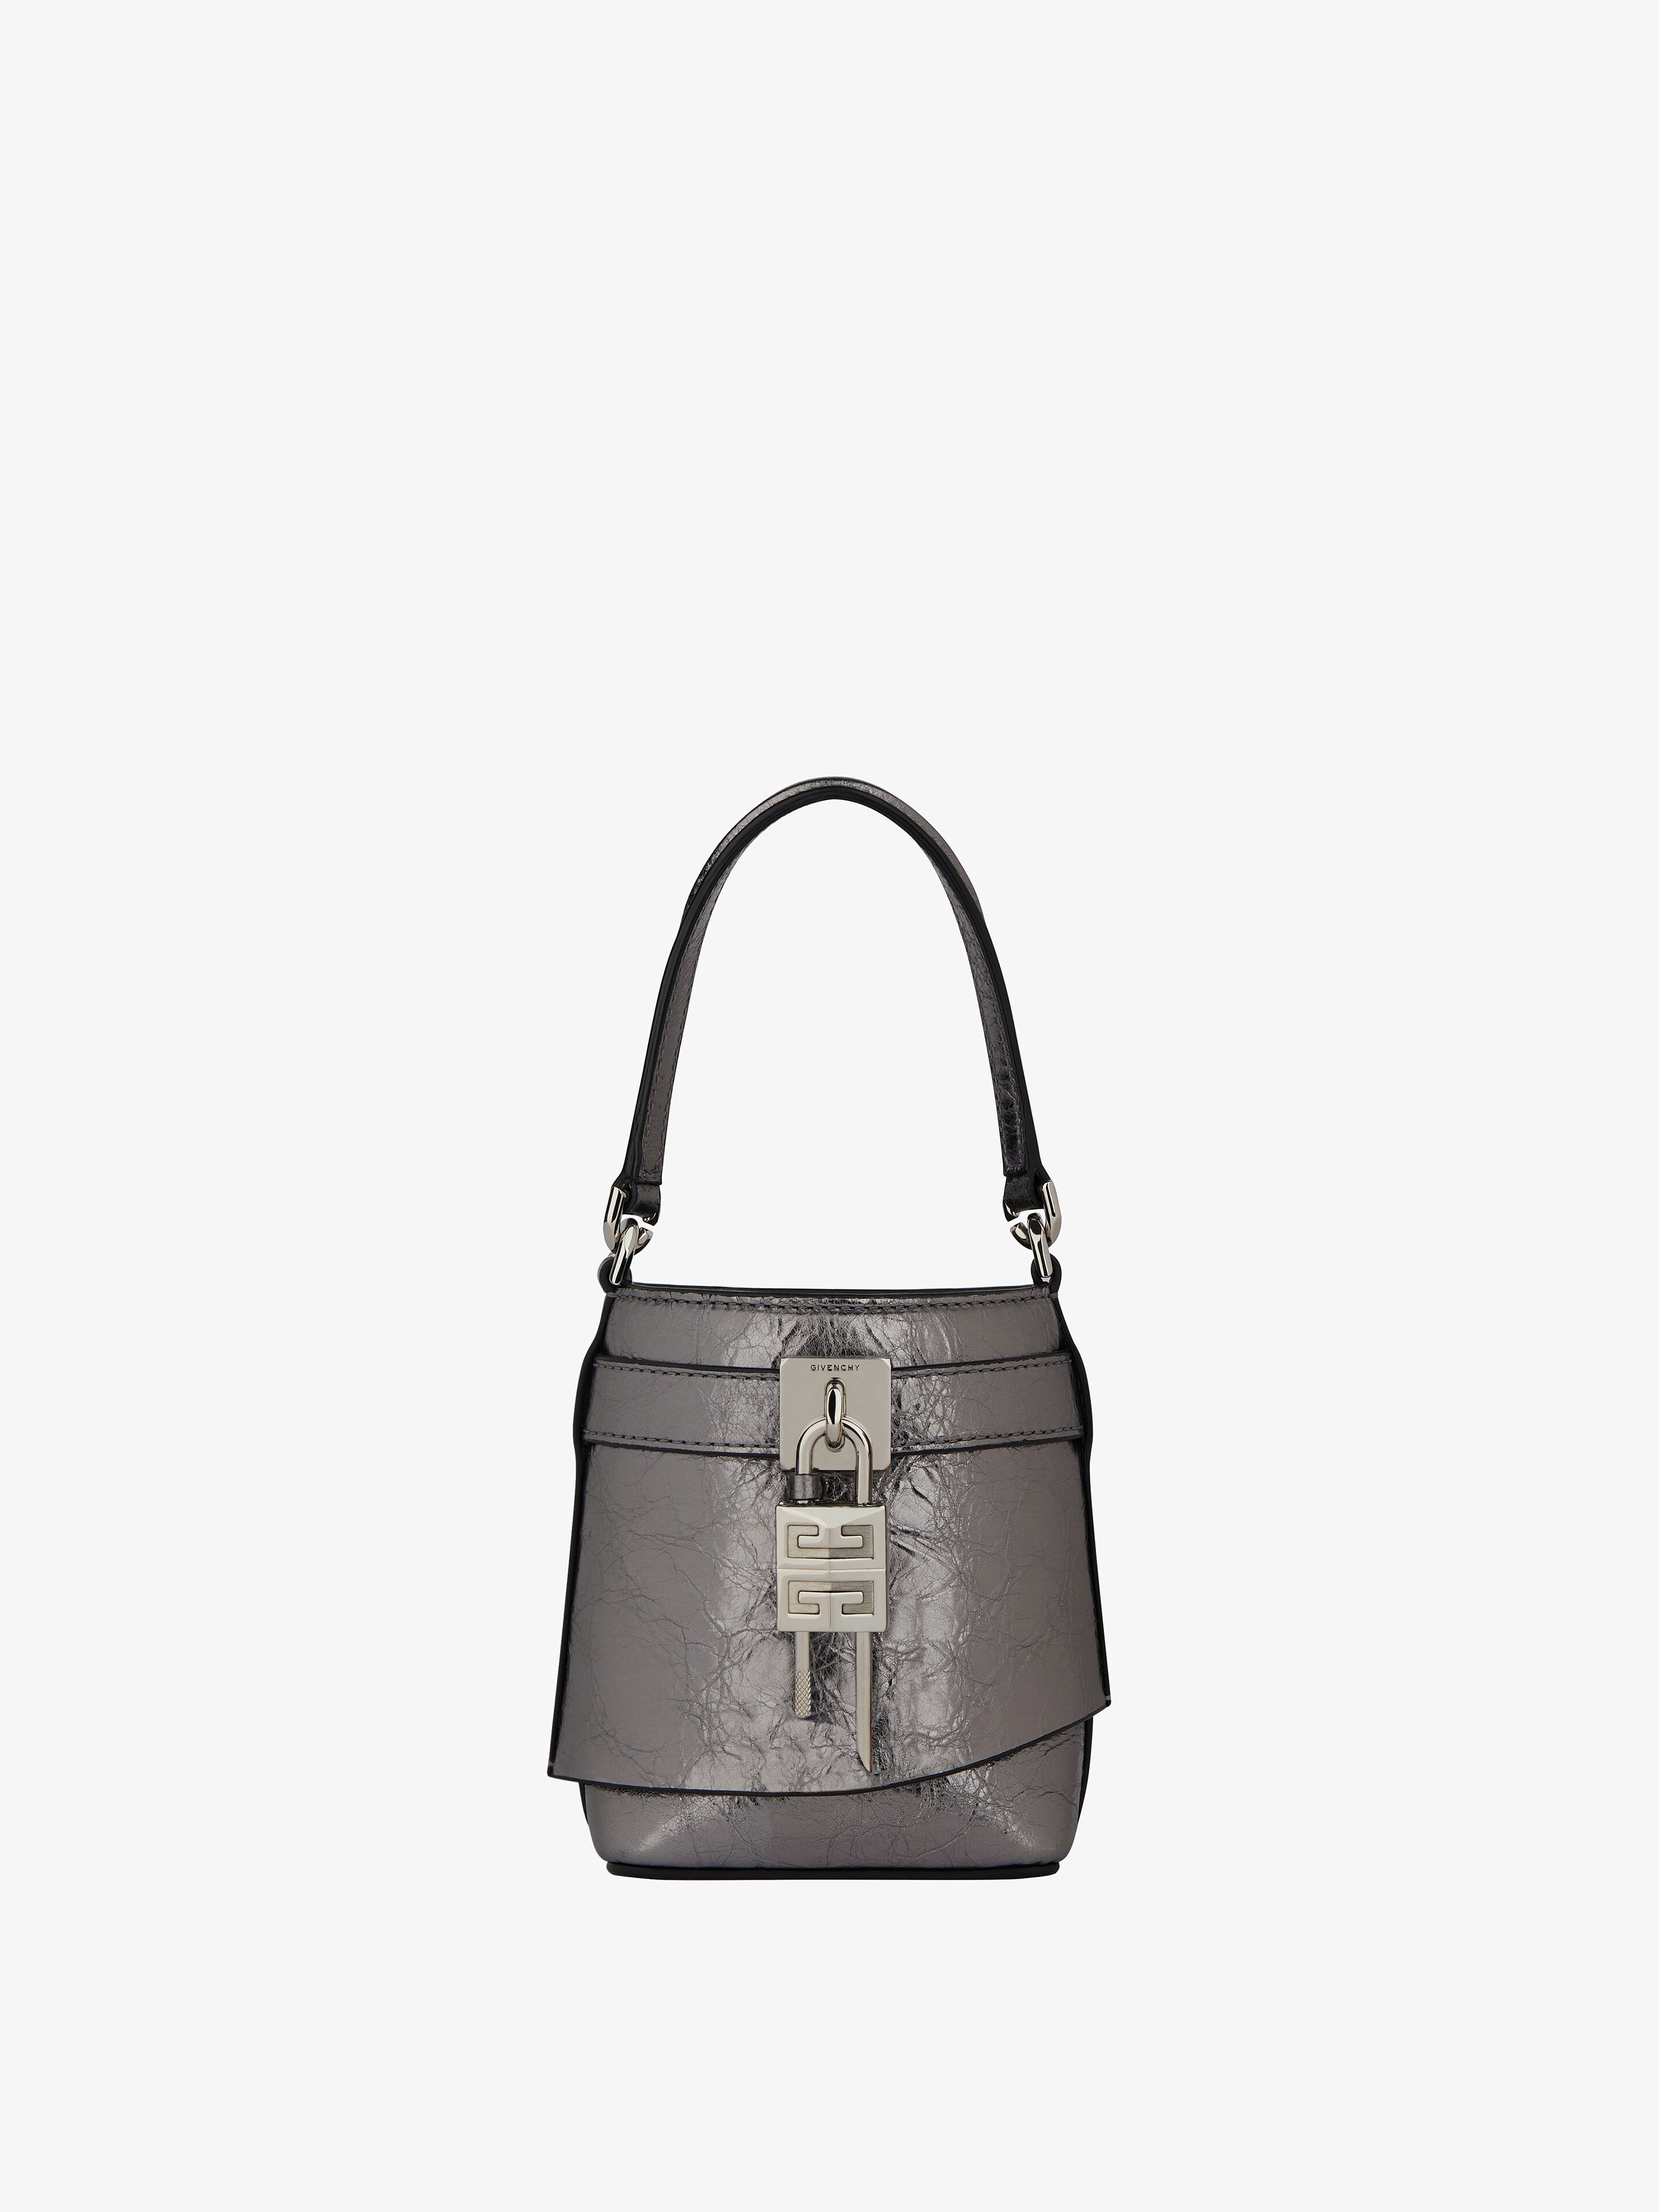 Givenchy Women's Micro Shark Lock Bucket Bag In Laminated Leather In Multicolor